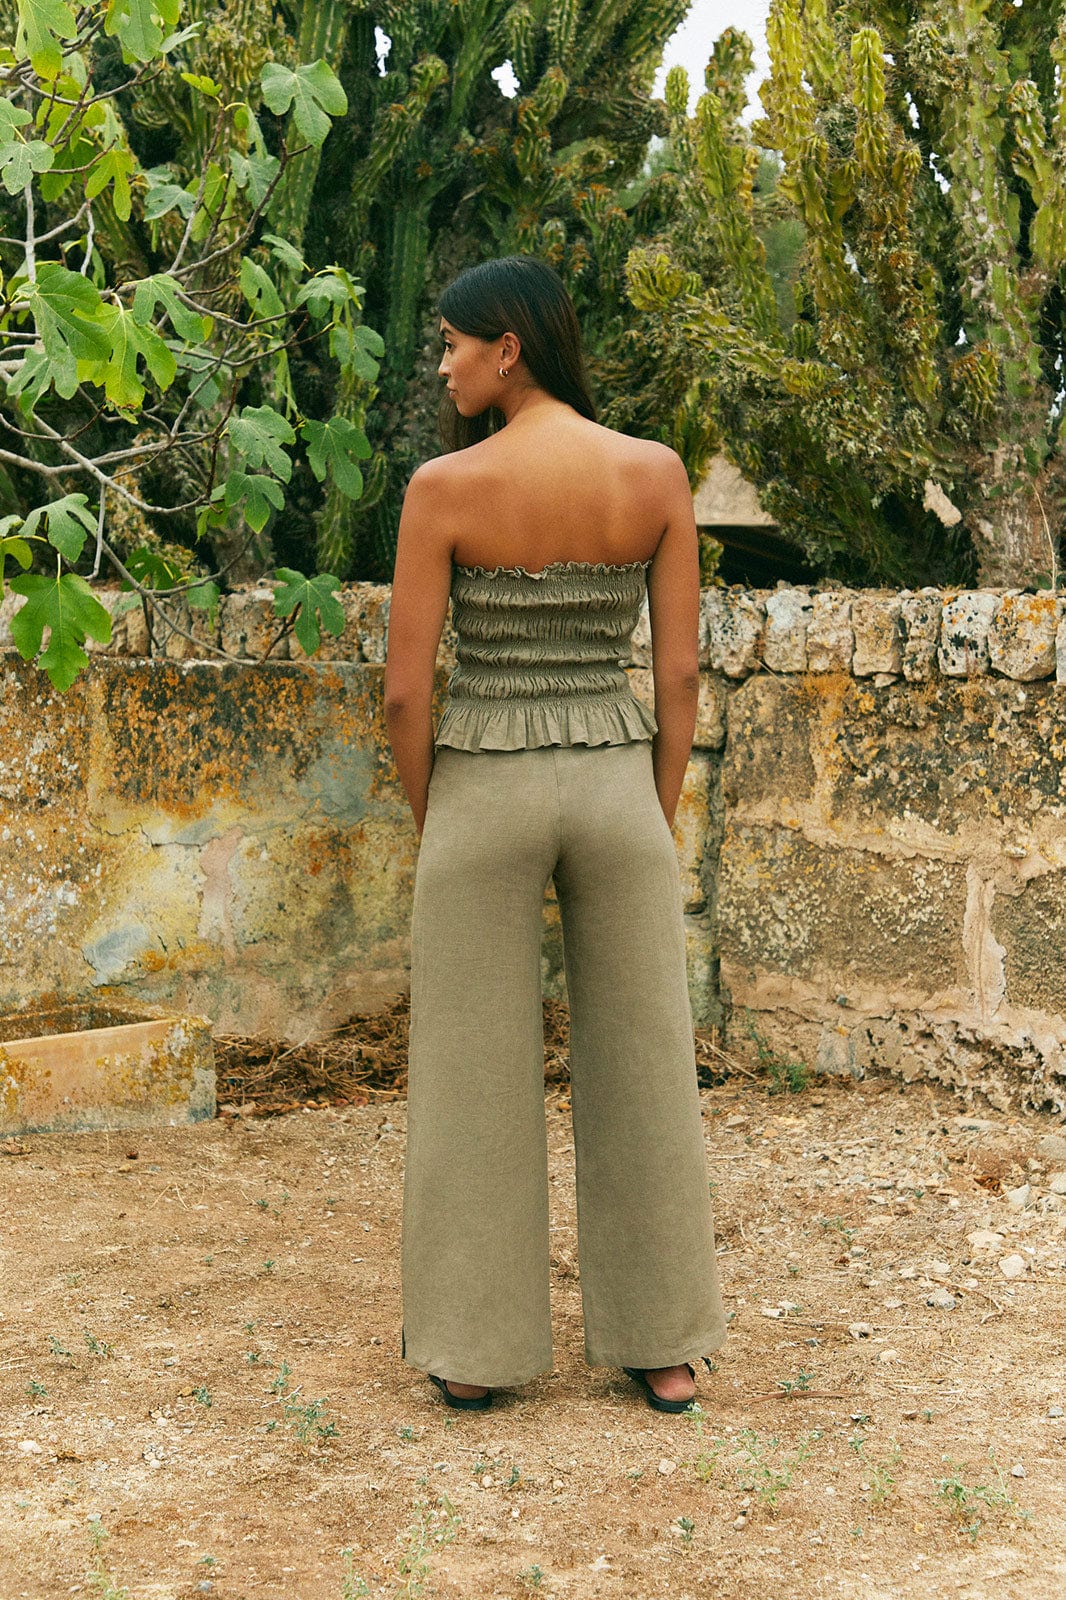 arkitaip Trousers The Lena Wide-Leg Trousers in taupe - Sample